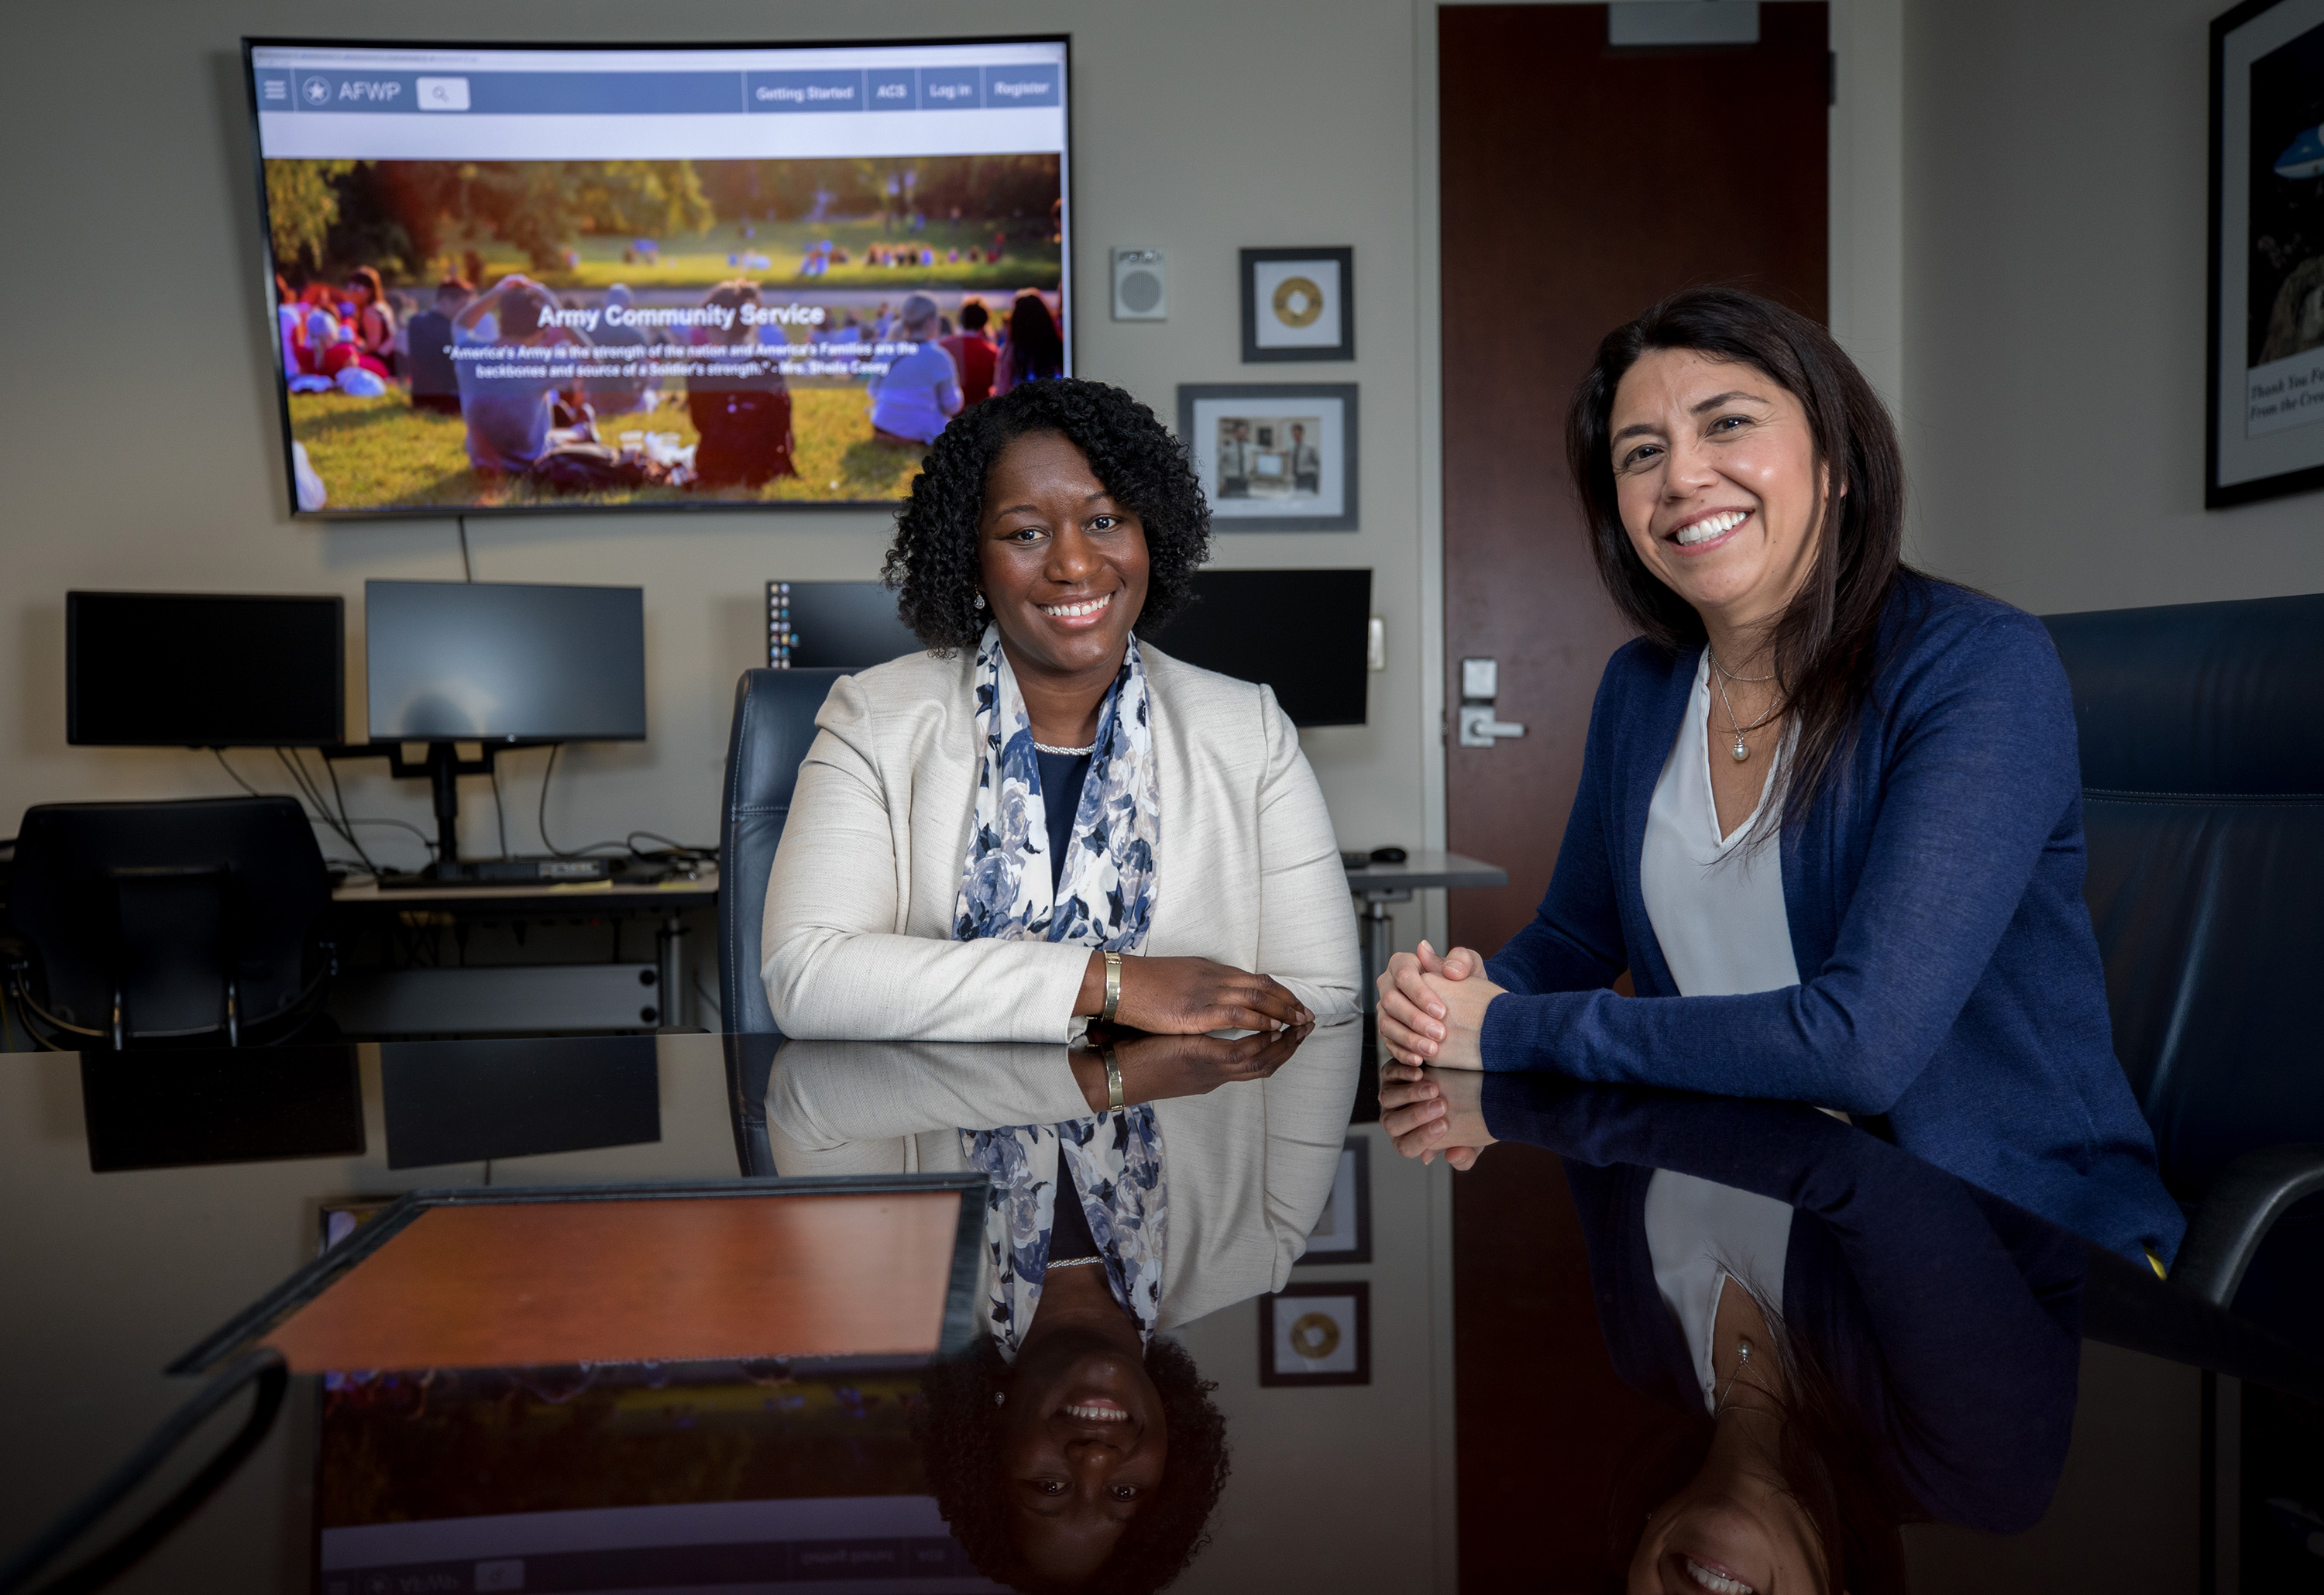 GTRI Senior Research Scientist Sheila Isbell and Senior Research Associate Margarita Gonzalez are helping the Army Community Service program revamp information systems used to provide an array of social services to the families of soldiers. (Credit: Branden Camp, Georgia Tech)